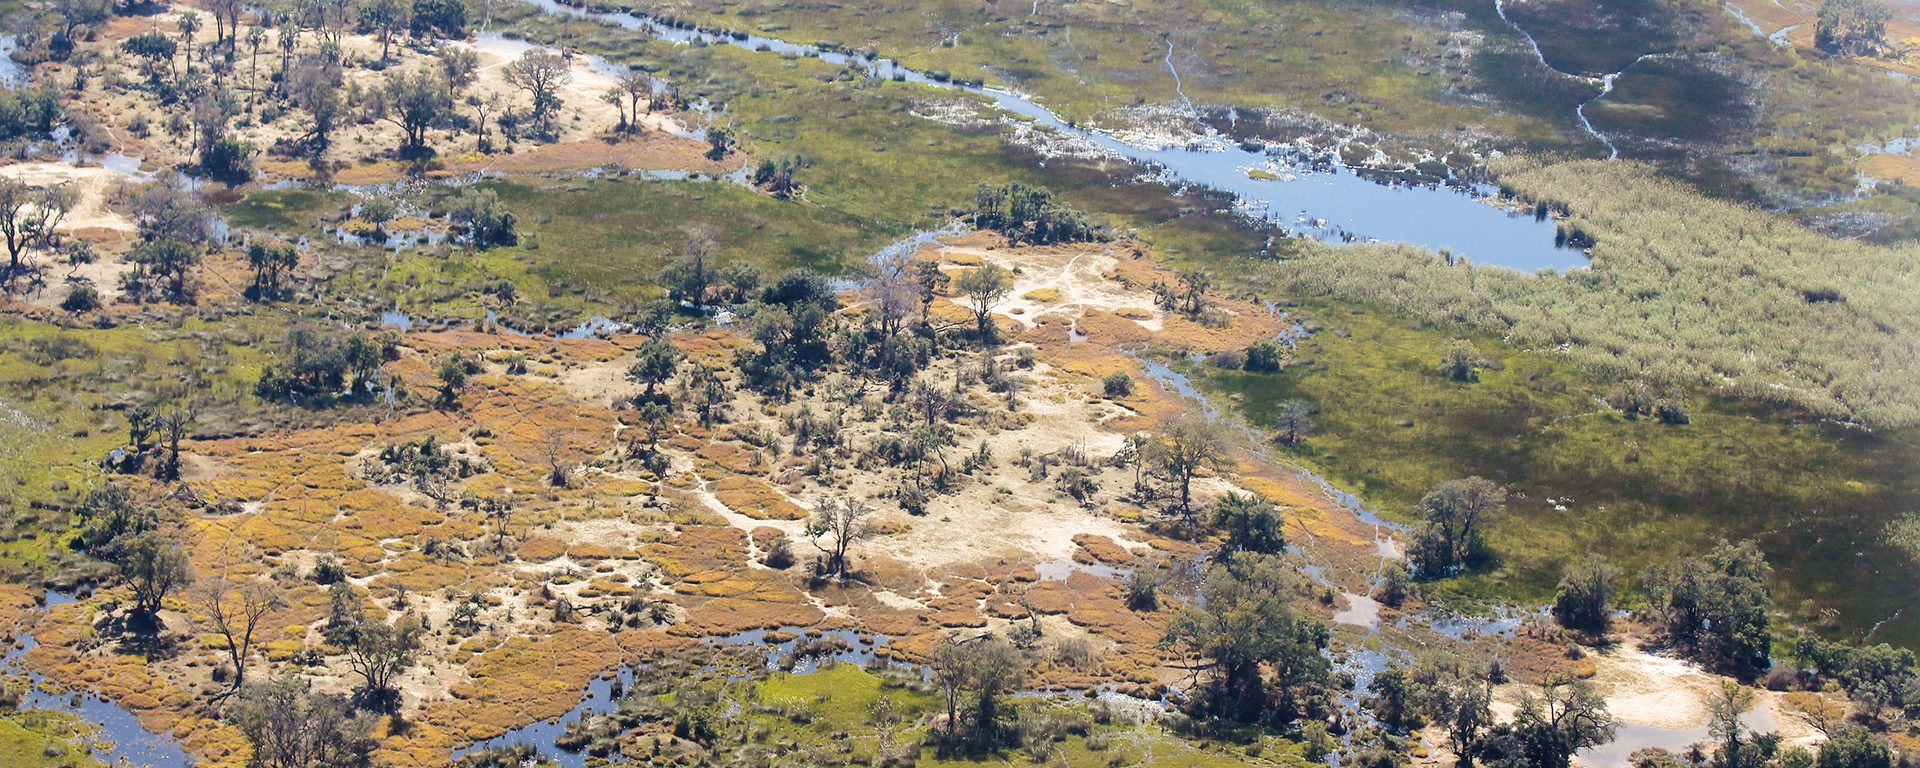 g2a_botswana_various-aerial-views-of-the-delta-spot-the-elephants